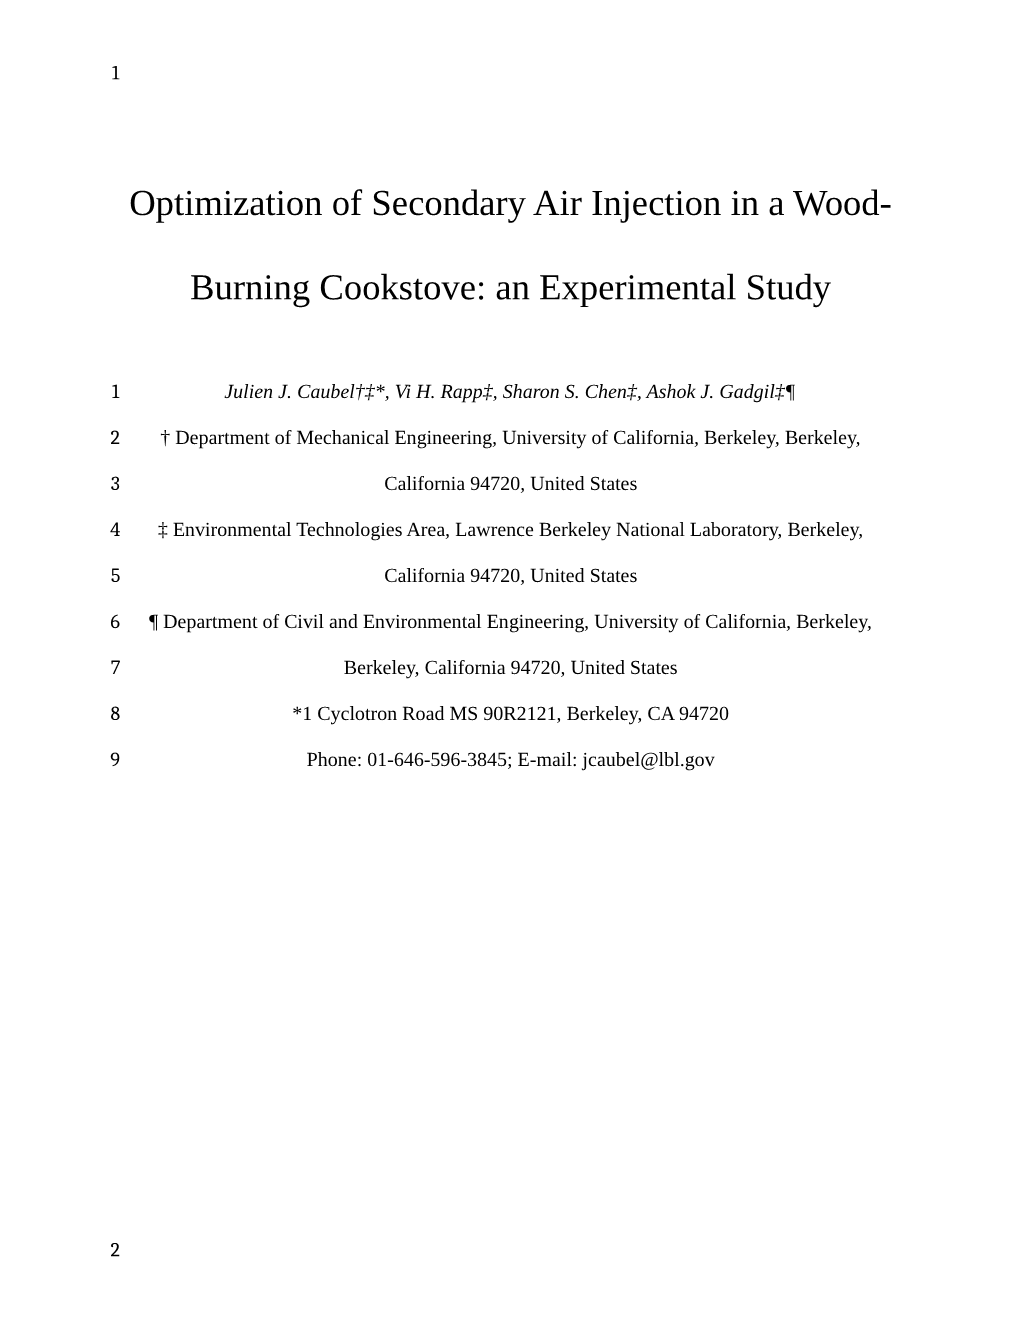 Optimization of Secondary Air Injection in a Wood- Burning